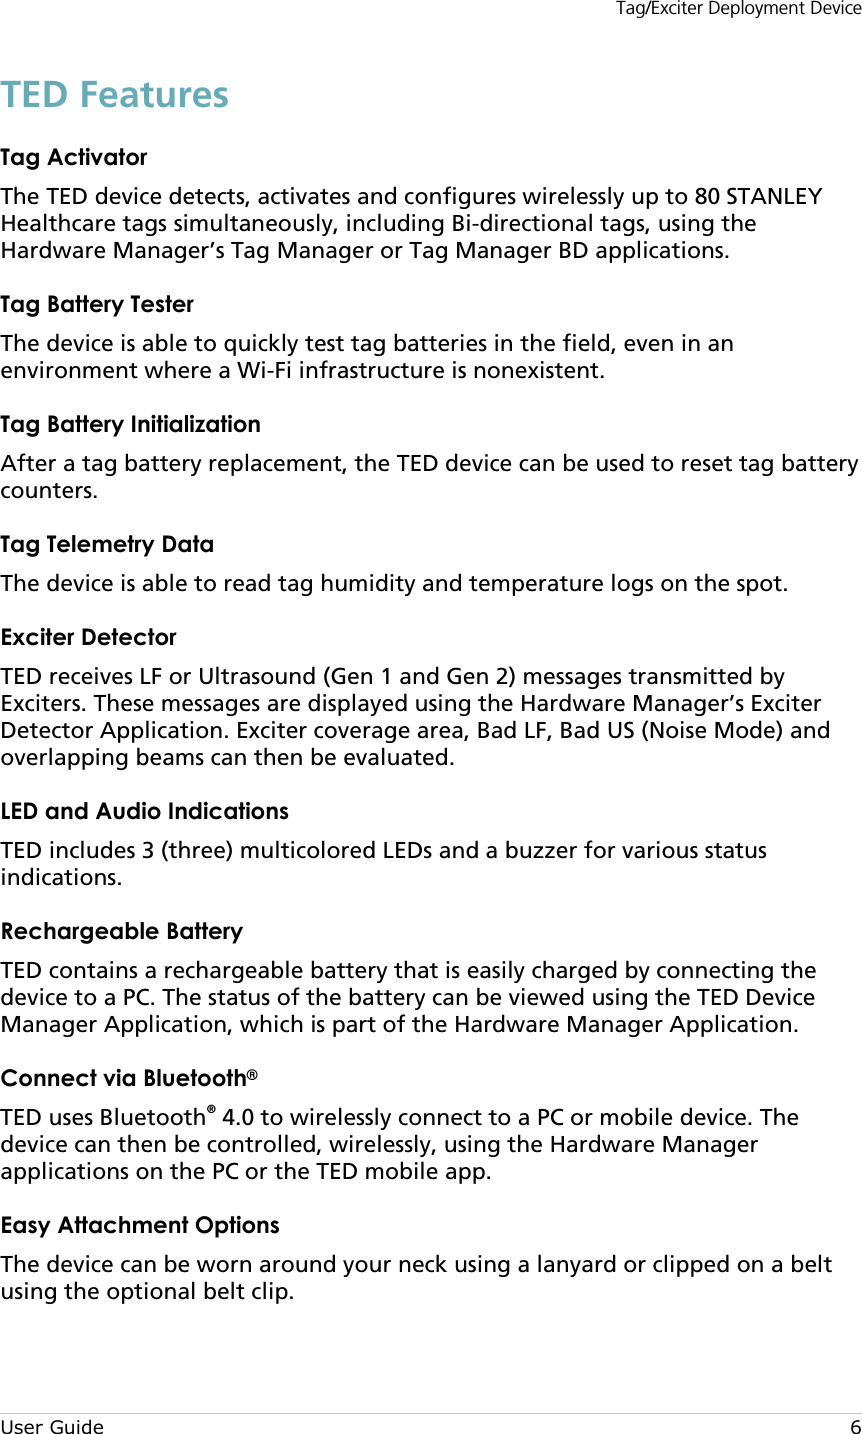 Tag/Exciter Deployment Device User Guide  6 TED Features Tag Activator The TED device detects, activates and configures wirelessly up to 80 STANLEY Healthcare tags simultaneously, including Bi-directional tags, using the Hardware Manager’s Tag Manager or Tag Manager BD applications. Tag Battery Tester  The device is able to quickly test tag batteries in the field, even in an environment where a Wi-Fi infrastructure is nonexistent.   Tag Battery Initialization  After a tag battery replacement, the TED device can be used to reset tag battery counters. Tag Telemetry Data  The device is able to read tag humidity and temperature logs on the spot. Exciter Detector TED receives LF or Ultrasound (Gen 1 and Gen 2) messages transmitted by Exciters. These messages are displayed using the Hardware Manager’s Exciter Detector Application. Exciter coverage area, Bad LF, Bad US (Noise Mode) and overlapping beams can then be evaluated.  LED and Audio Indications TED includes 3 (three) multicolored LEDs and a buzzer for various status indications. Rechargeable Battery TED contains a rechargeable battery that is easily charged by connecting the device to a PC. The status of the battery can be viewed using the TED Device Manager Application, which is part of the Hardware Manager Application.  Connect via Bluetooth® TED uses Bluetooth® 4.0 to wirelessly connect to a PC or mobile device. The device can then be controlled, wirelessly, using the Hardware Manager applications on the PC or the TED mobile app. Easy Attachment Options The device can be worn around your neck using a lanyard or clipped on a belt using the optional belt clip. 